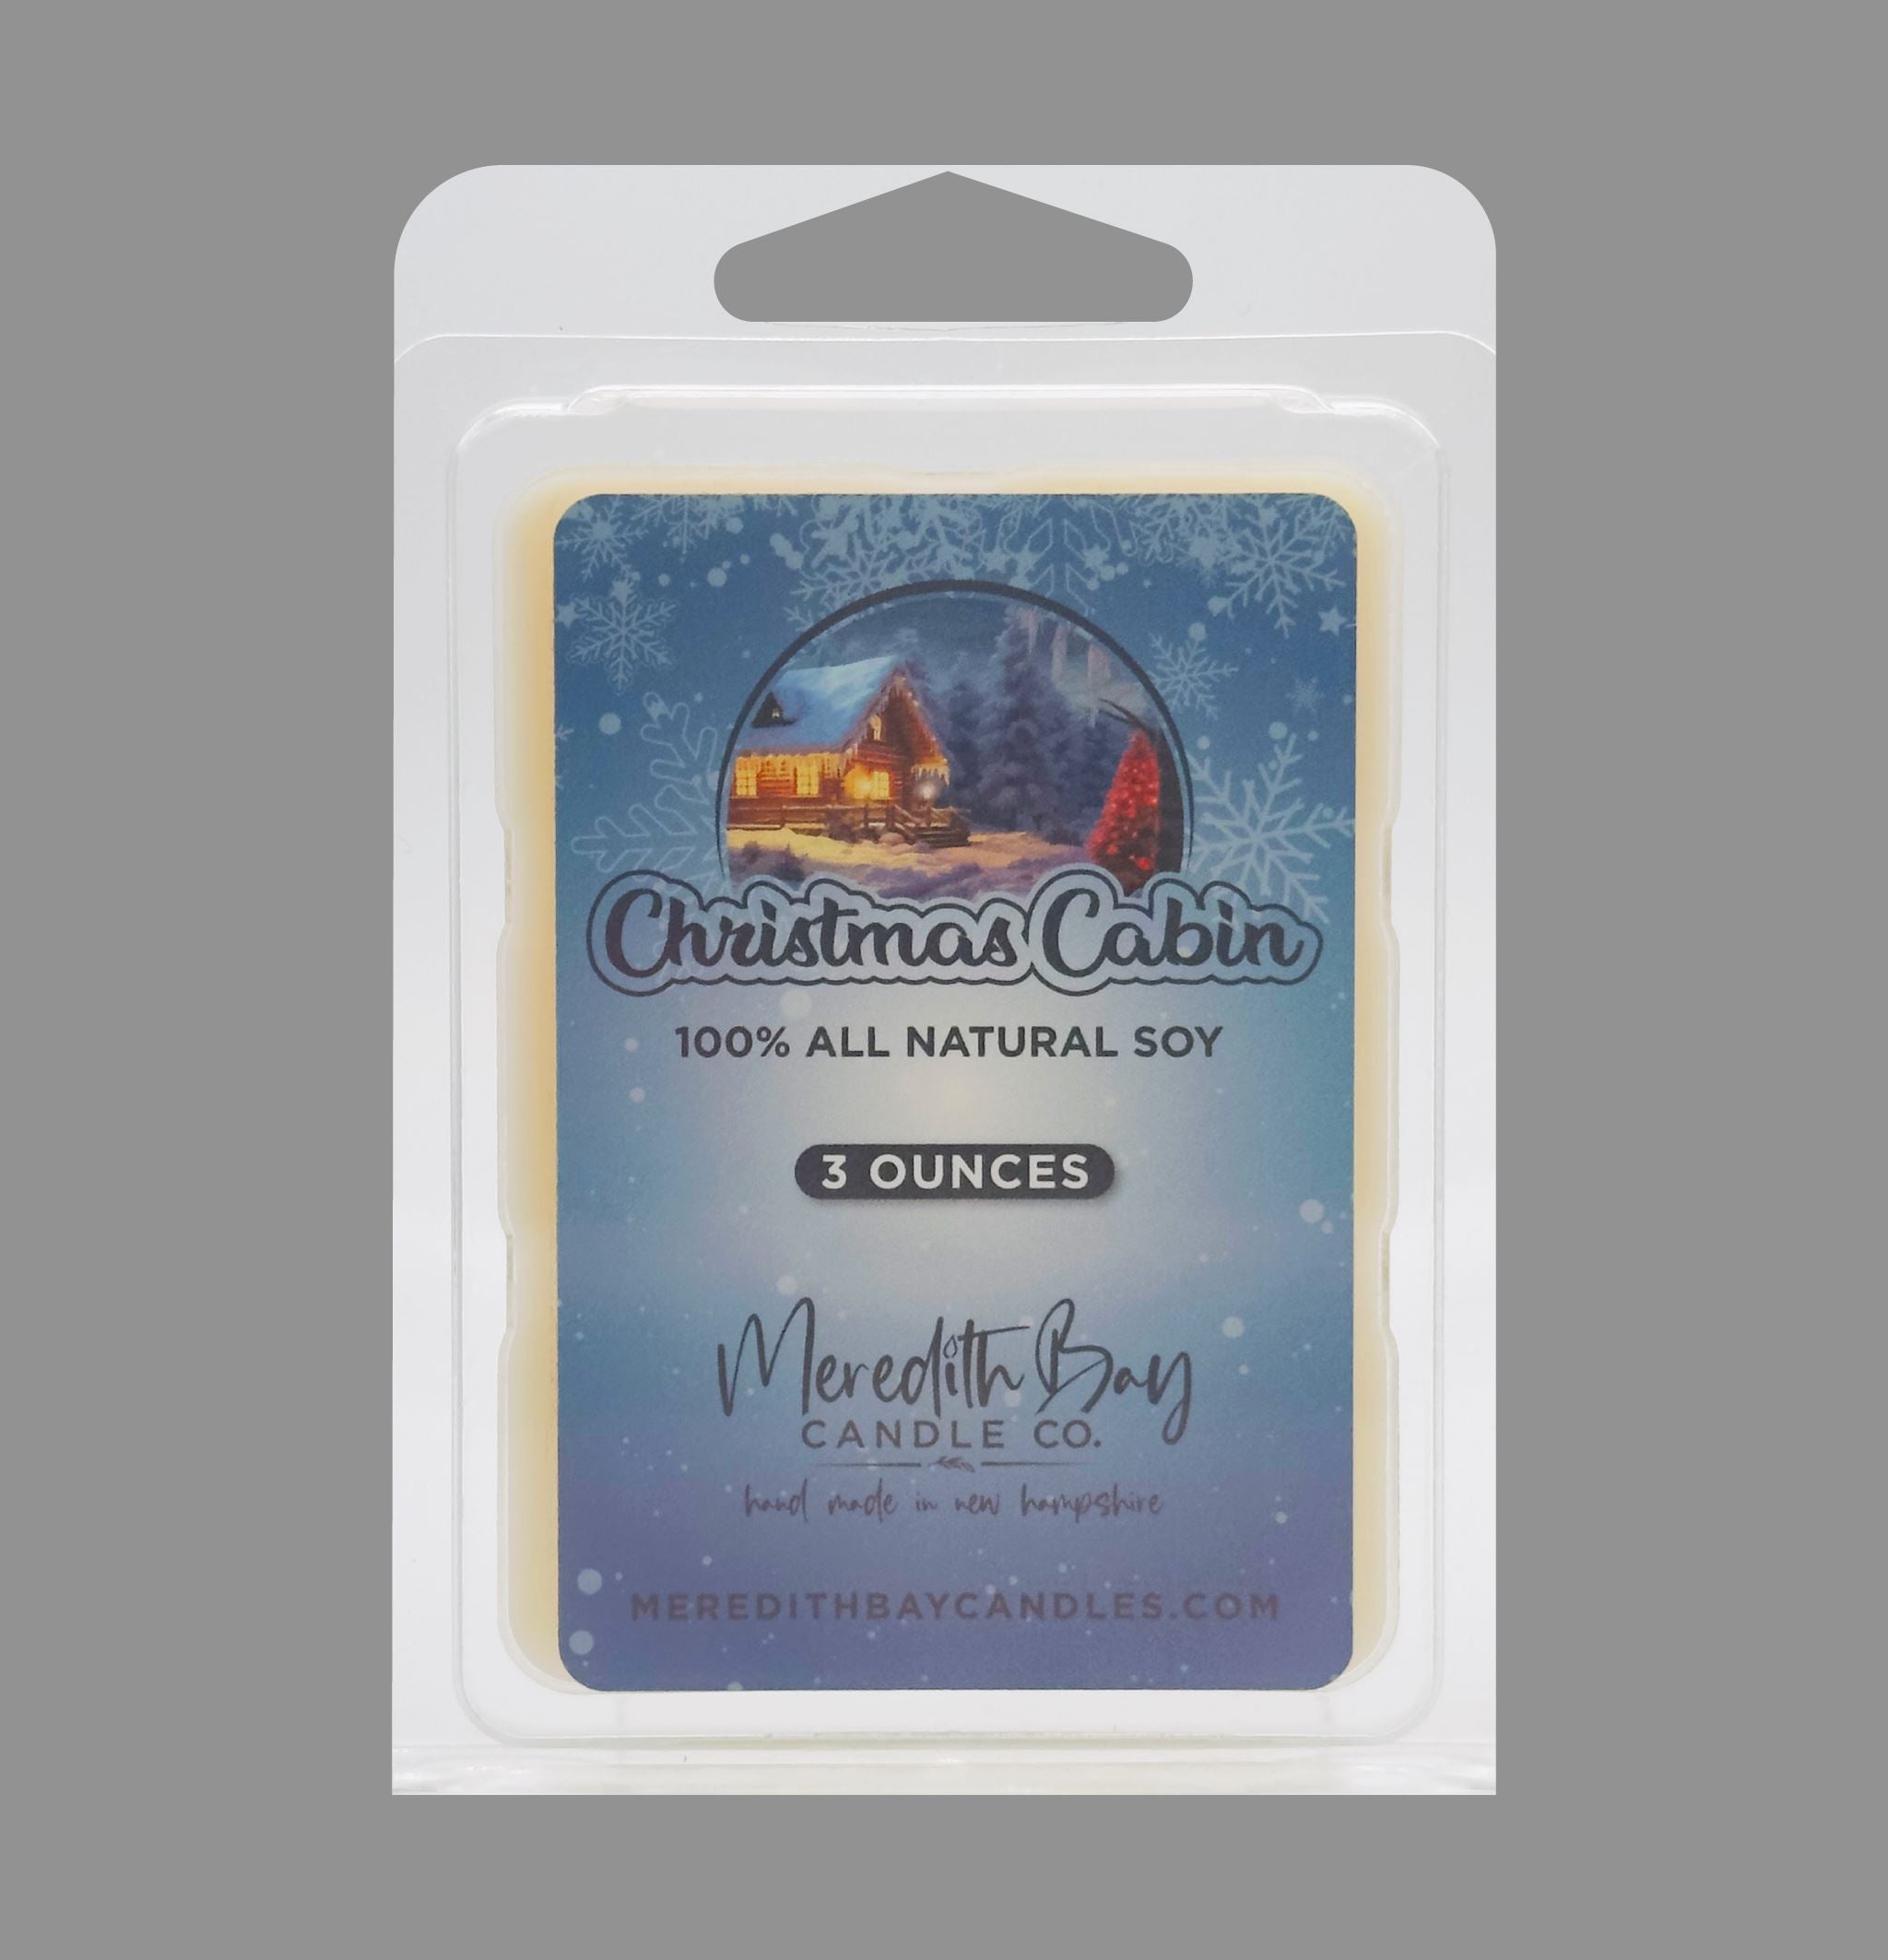 Christmas Cabin Wax Melt Meredith Bay Candle Co 